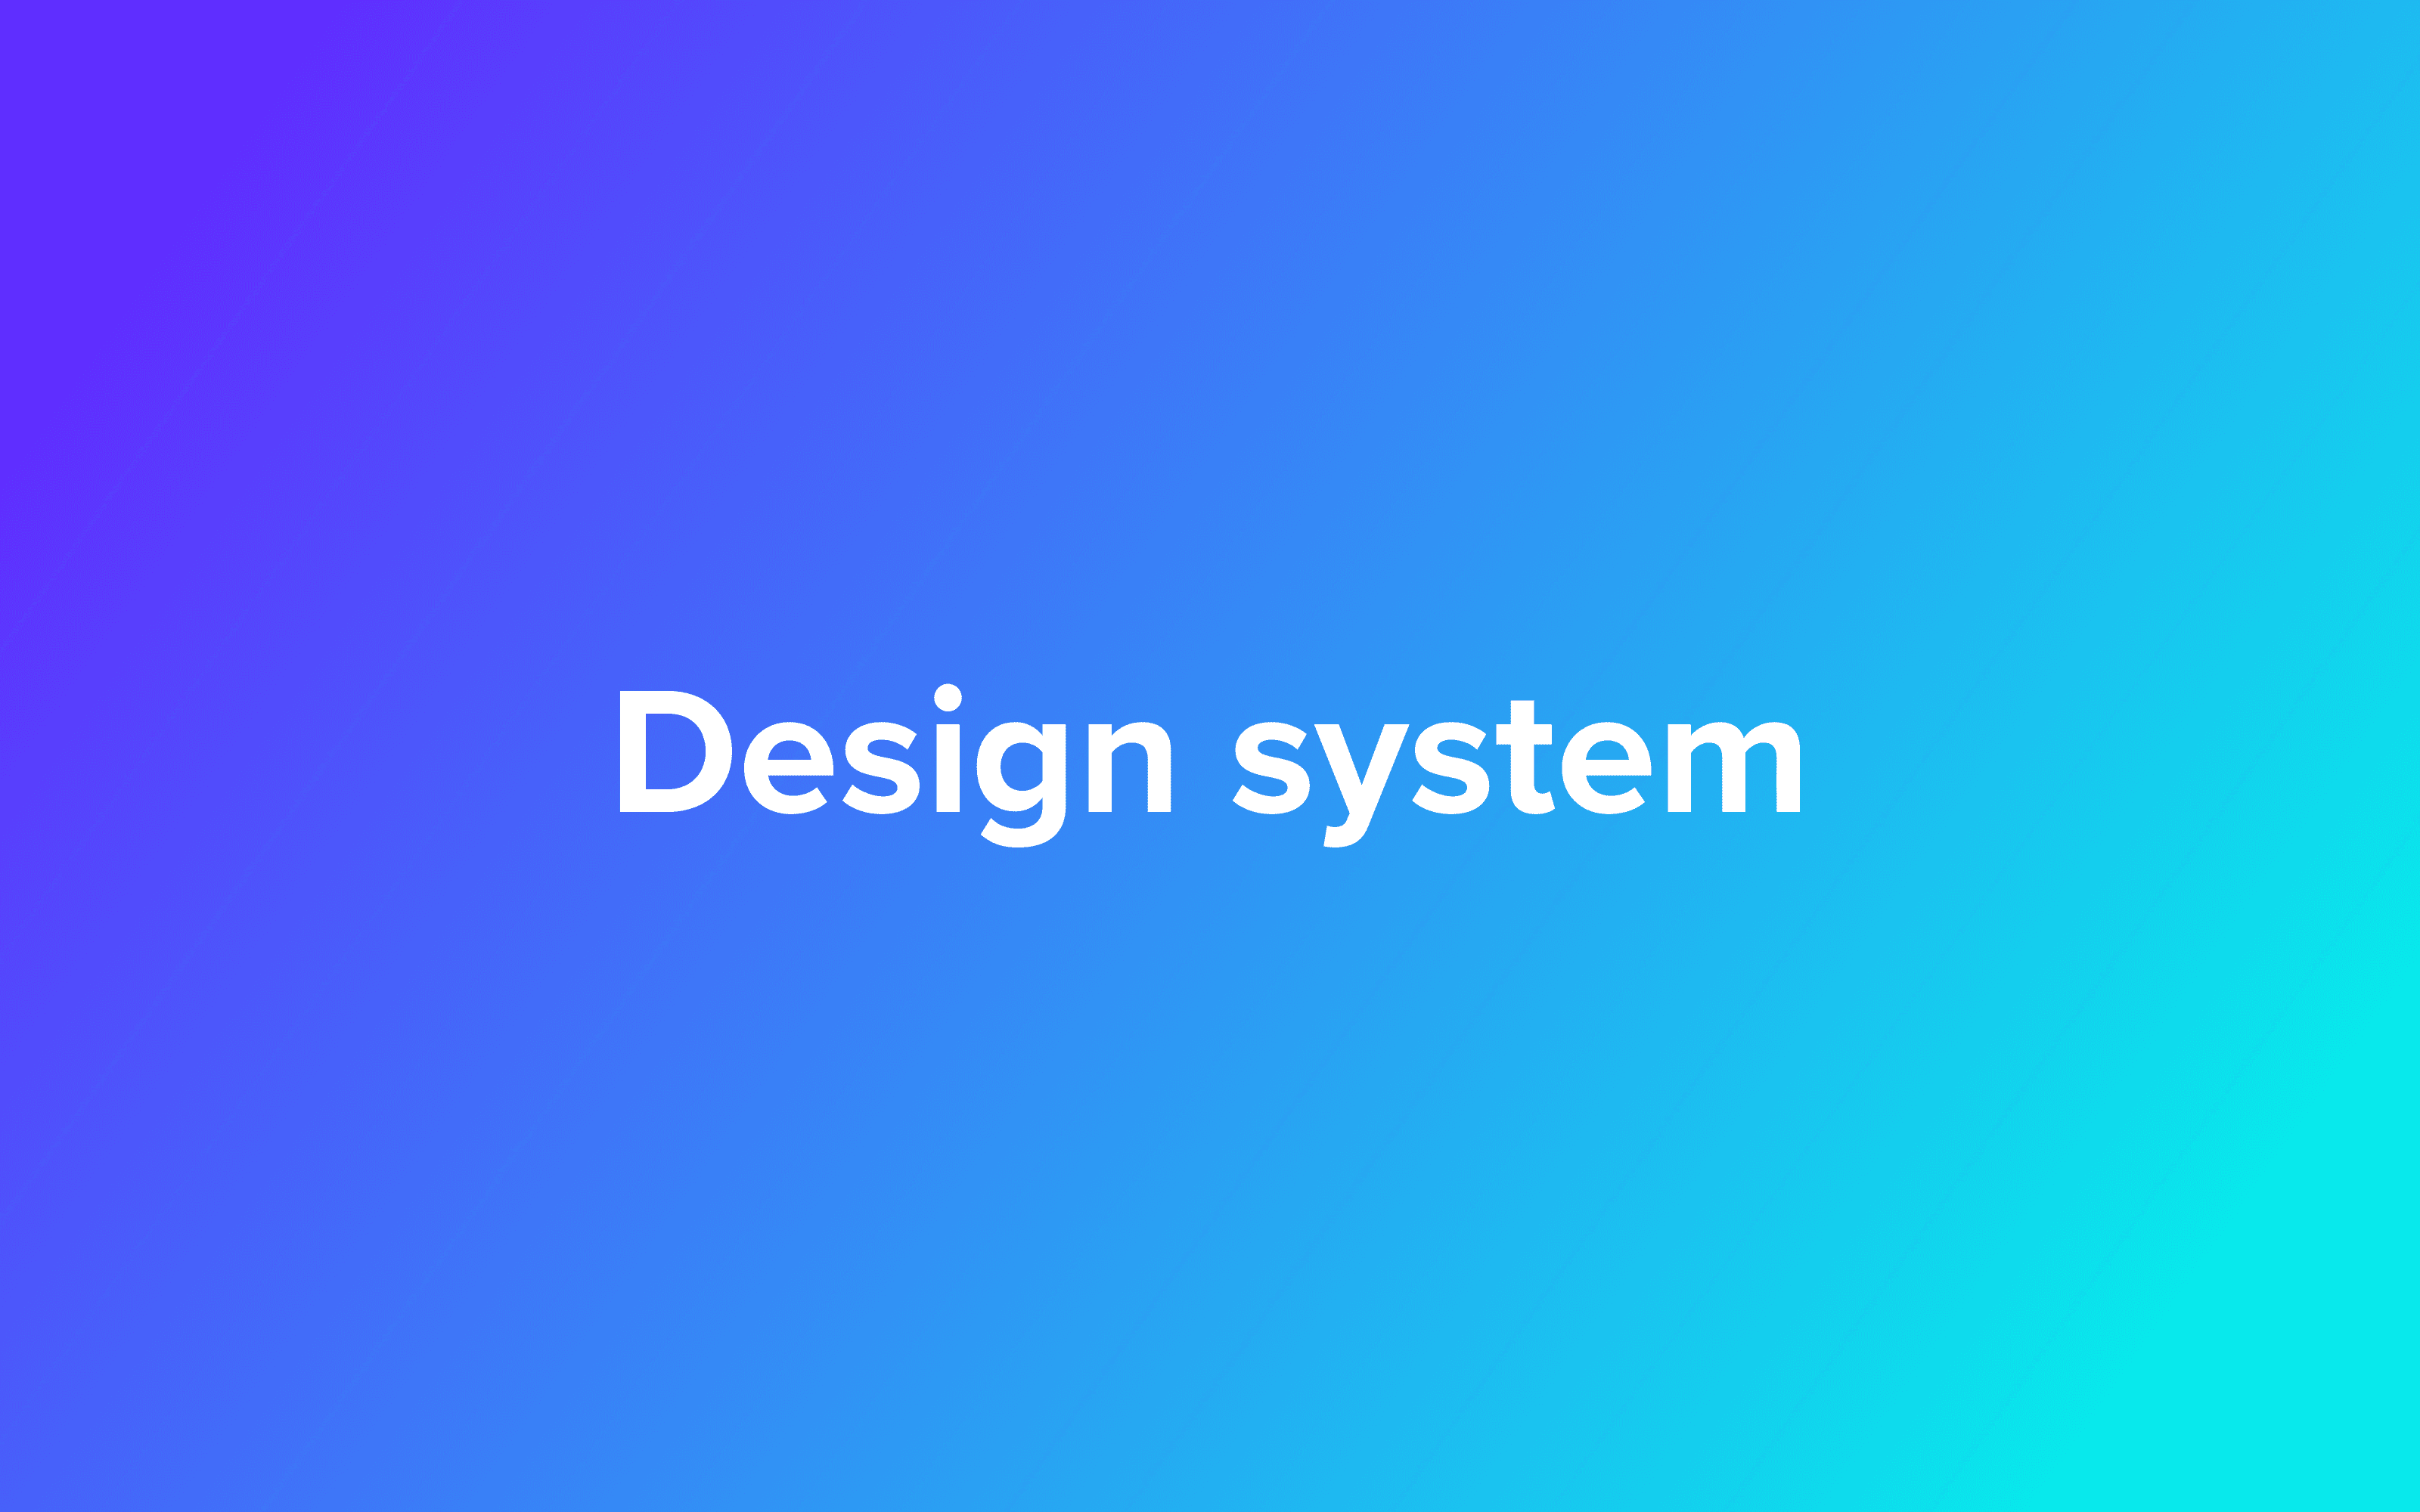 Purple to cyan gradient on the background. Big white letters read “Design system”.